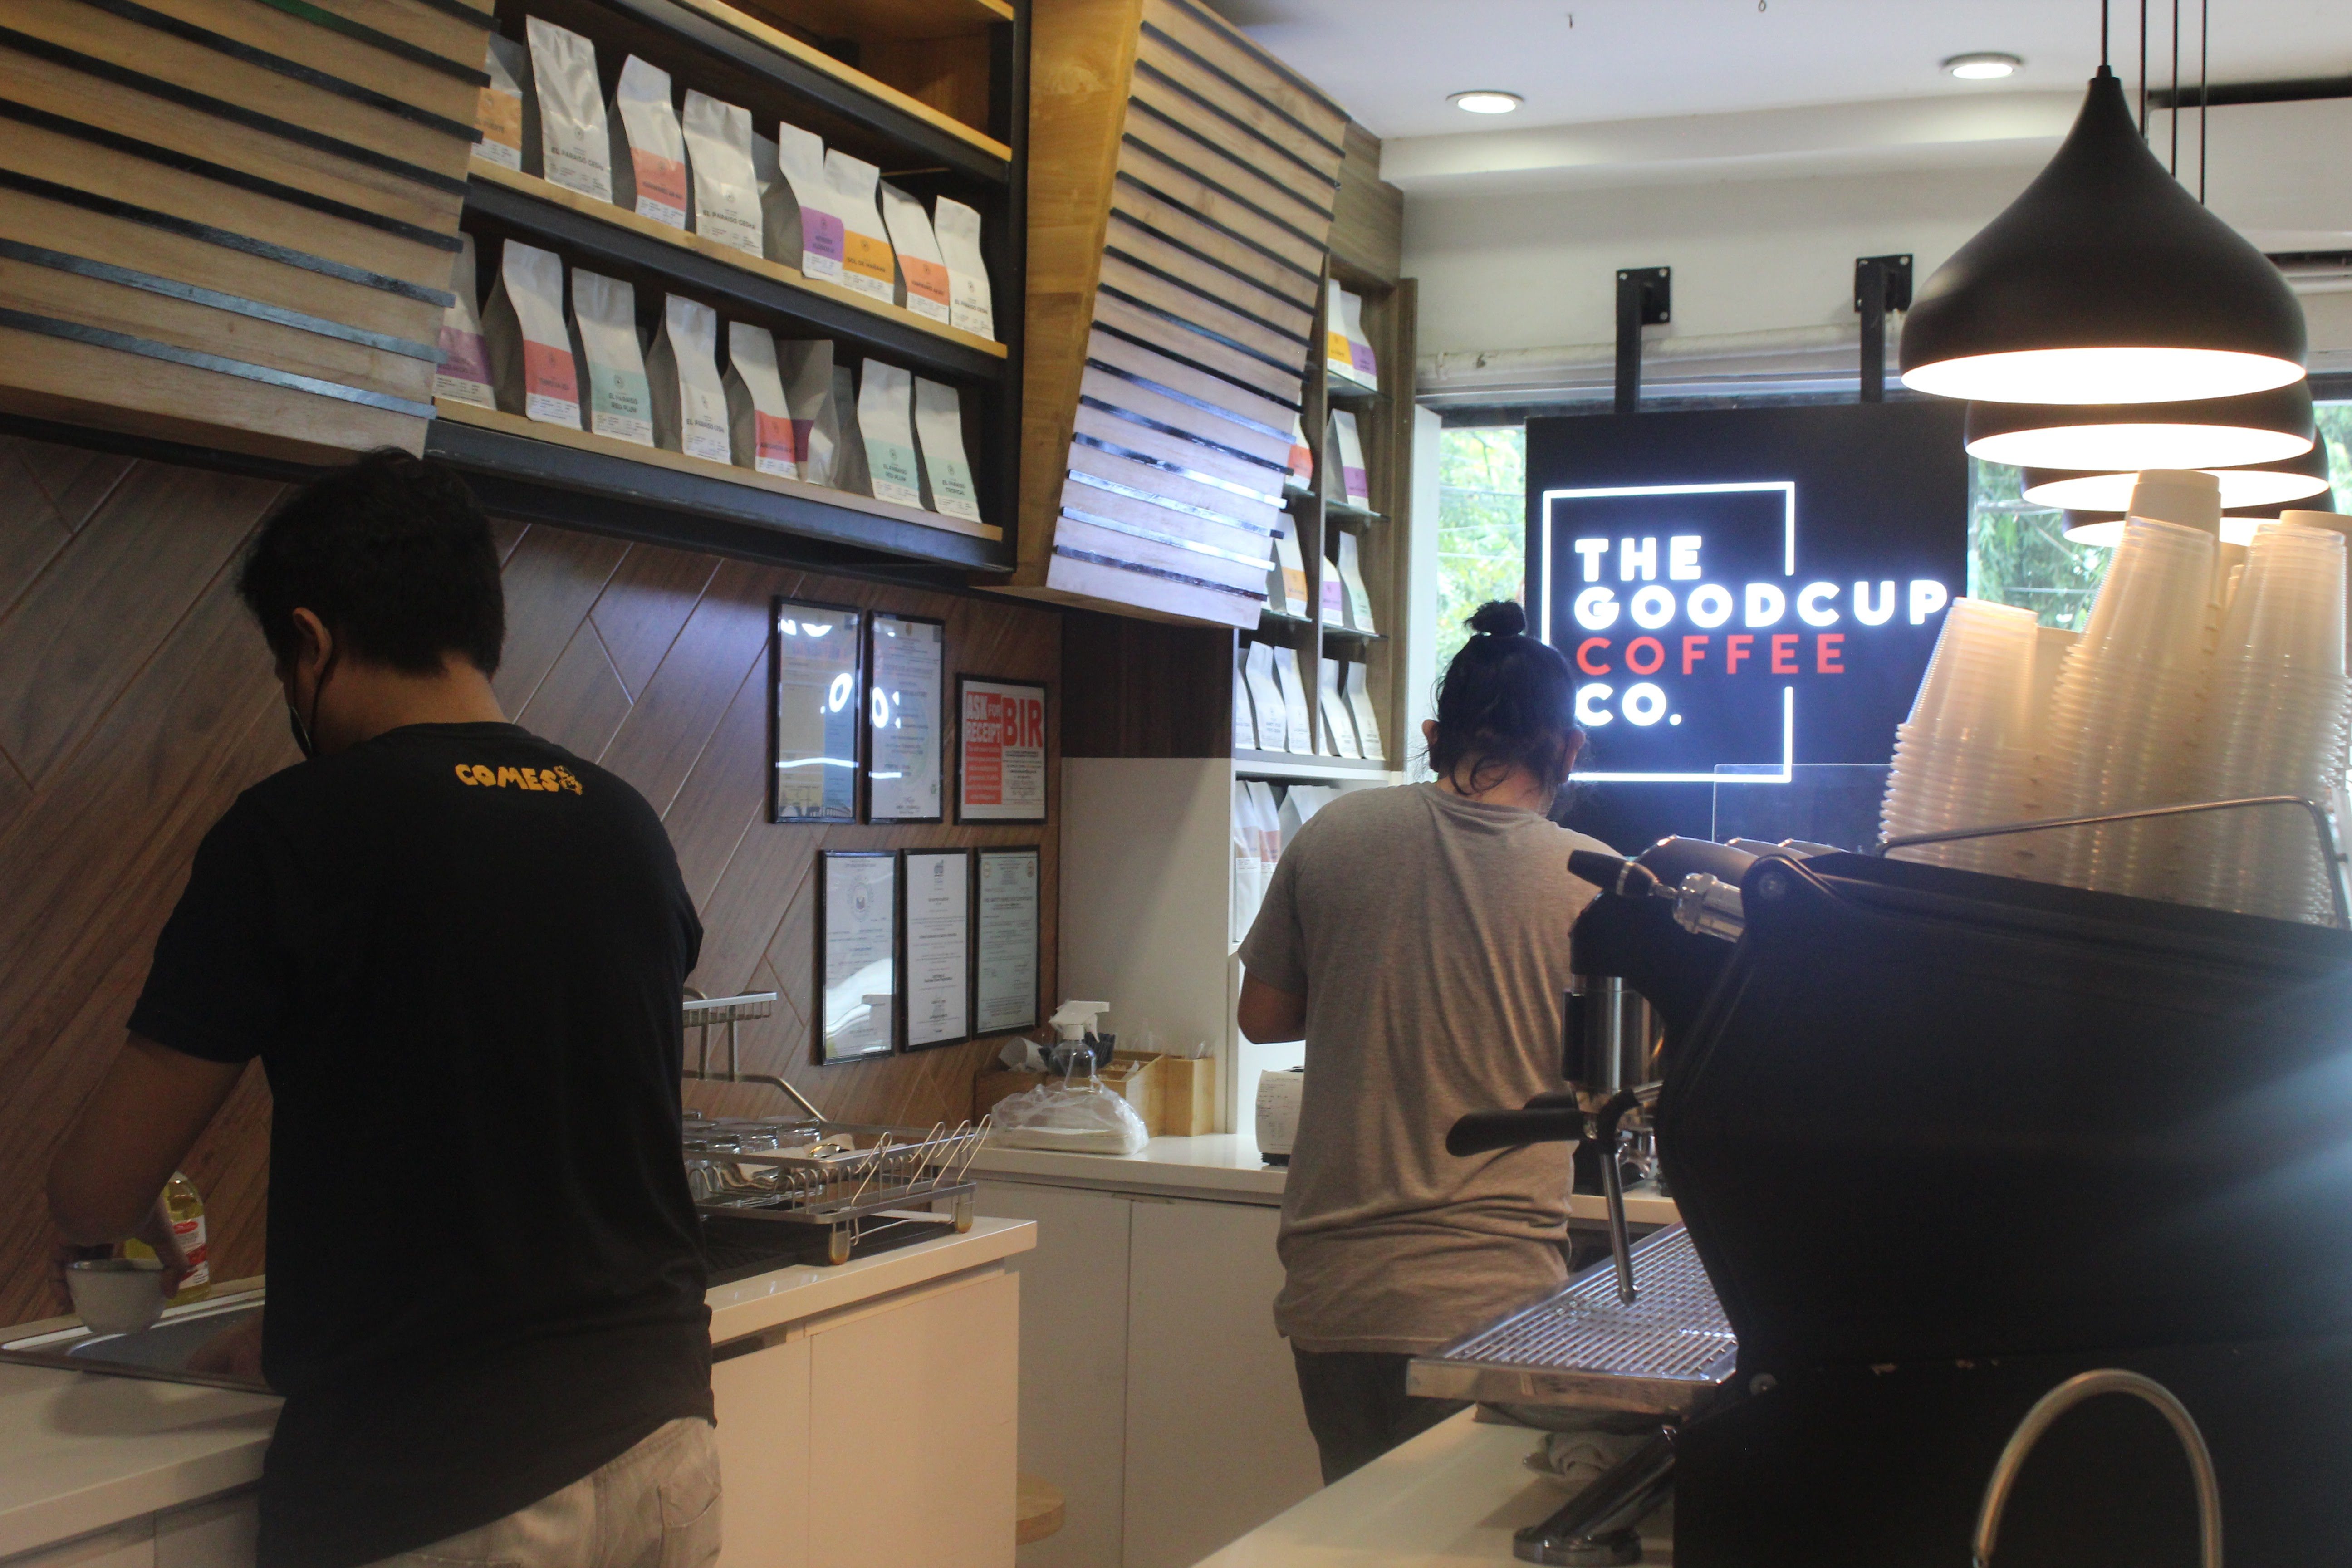 The Good Cup Coffee Company brings coffee experience to Cebuanos’ homes